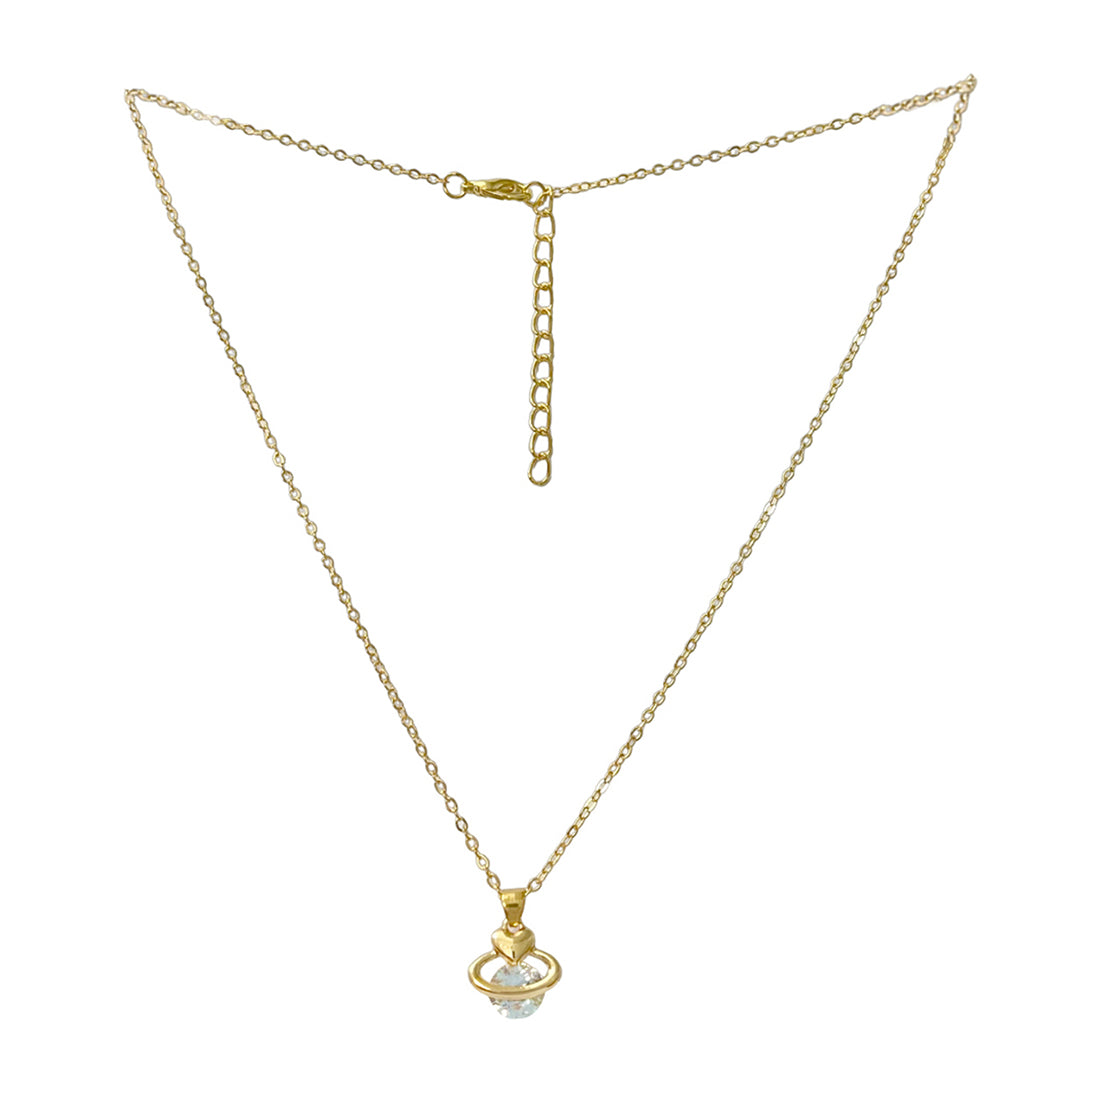 Ayesha Mini Love Planet with Diamante Stud Pendant Gold-Toned Necklace